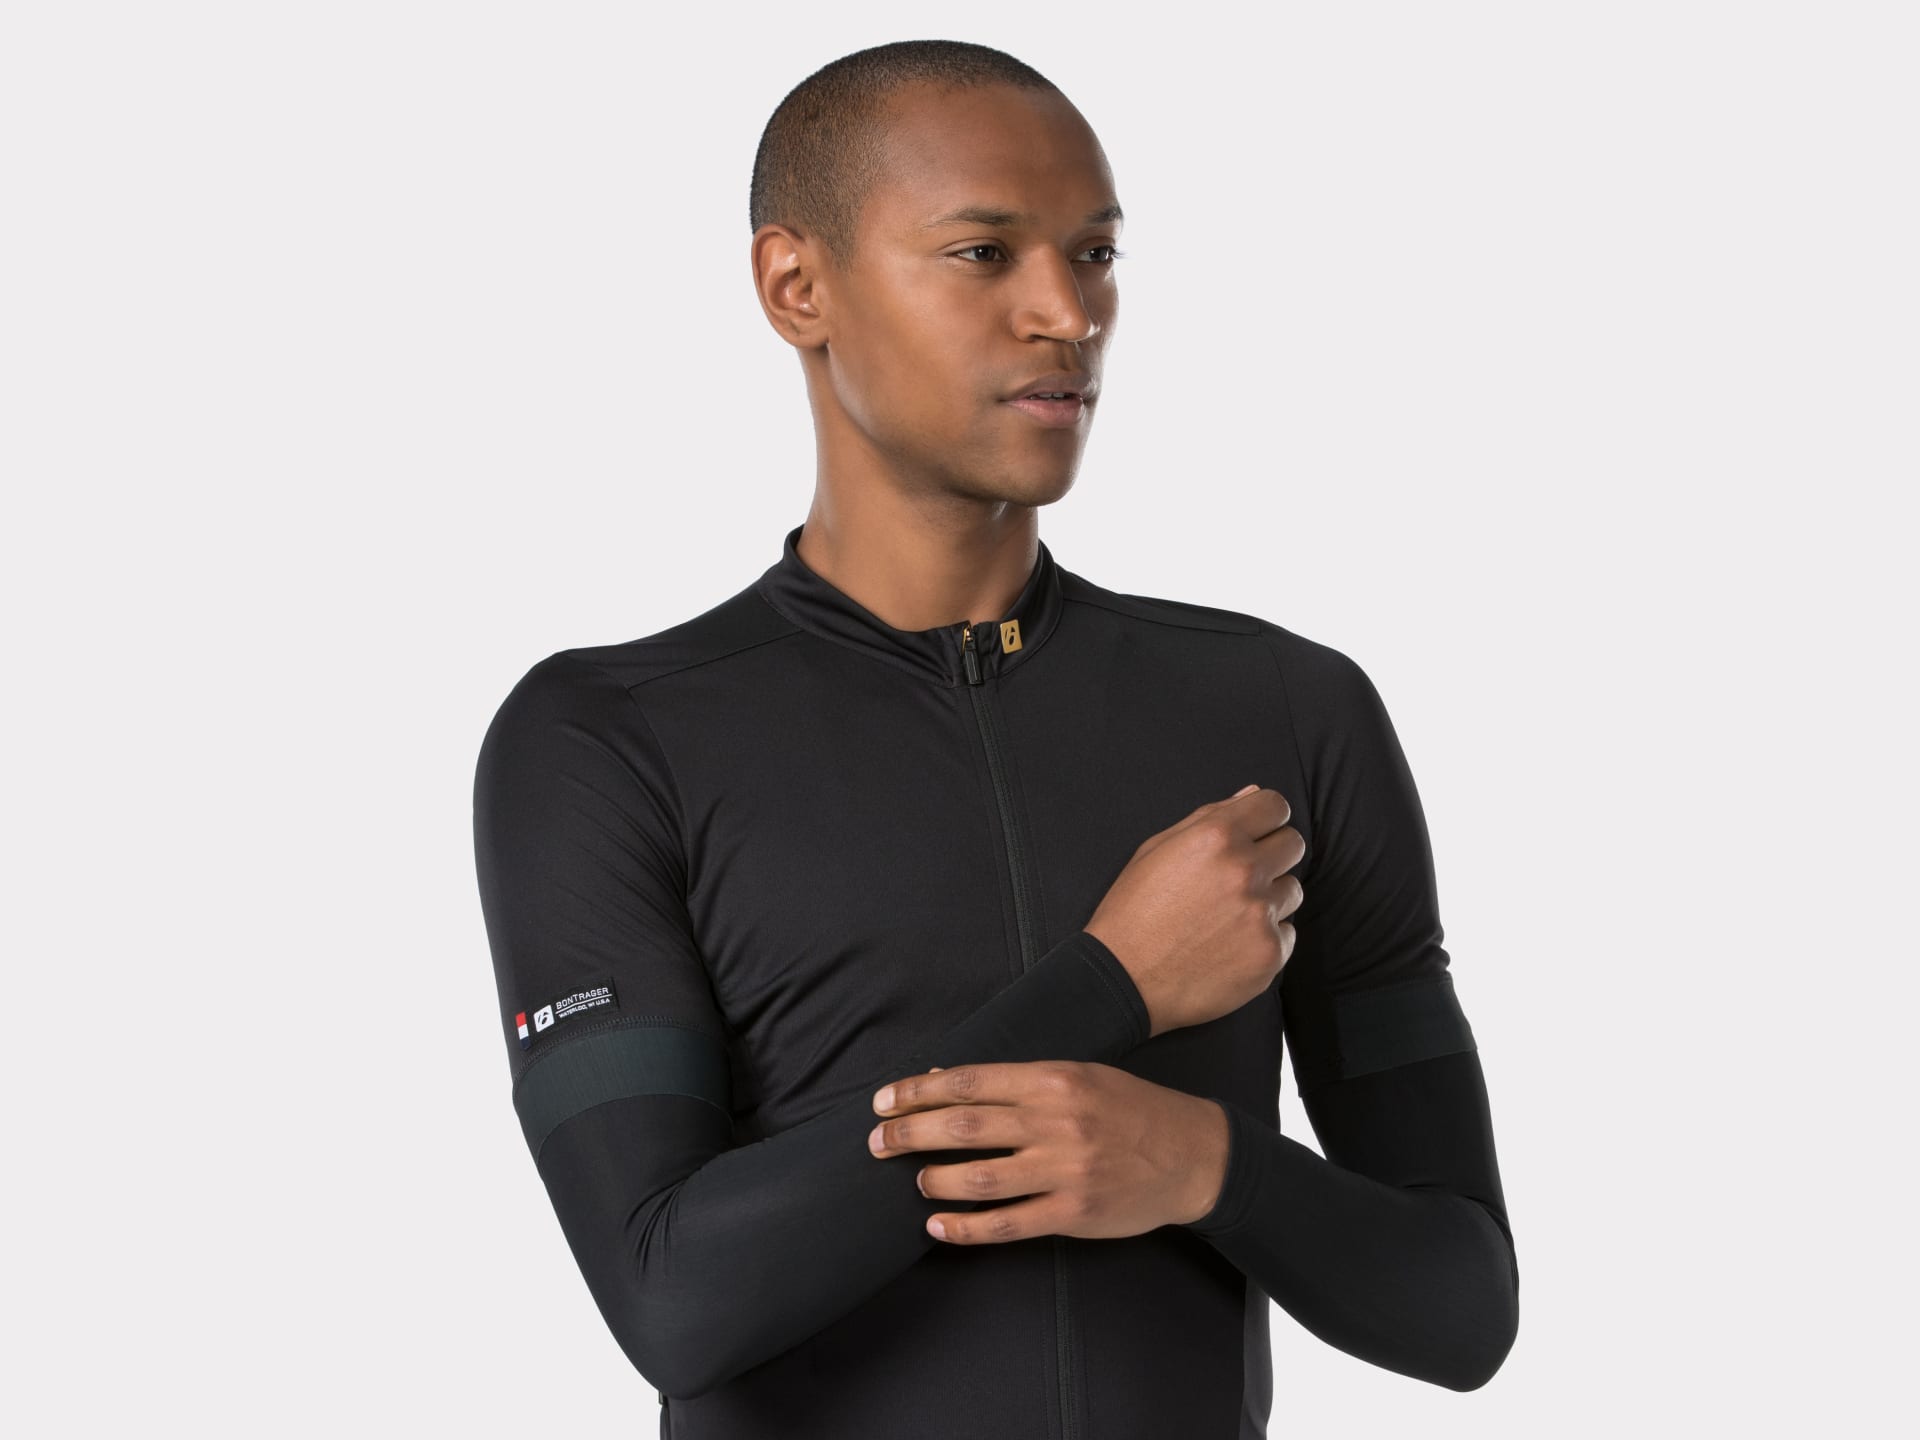 Bontrager Thermal Cycling Arm Warmer